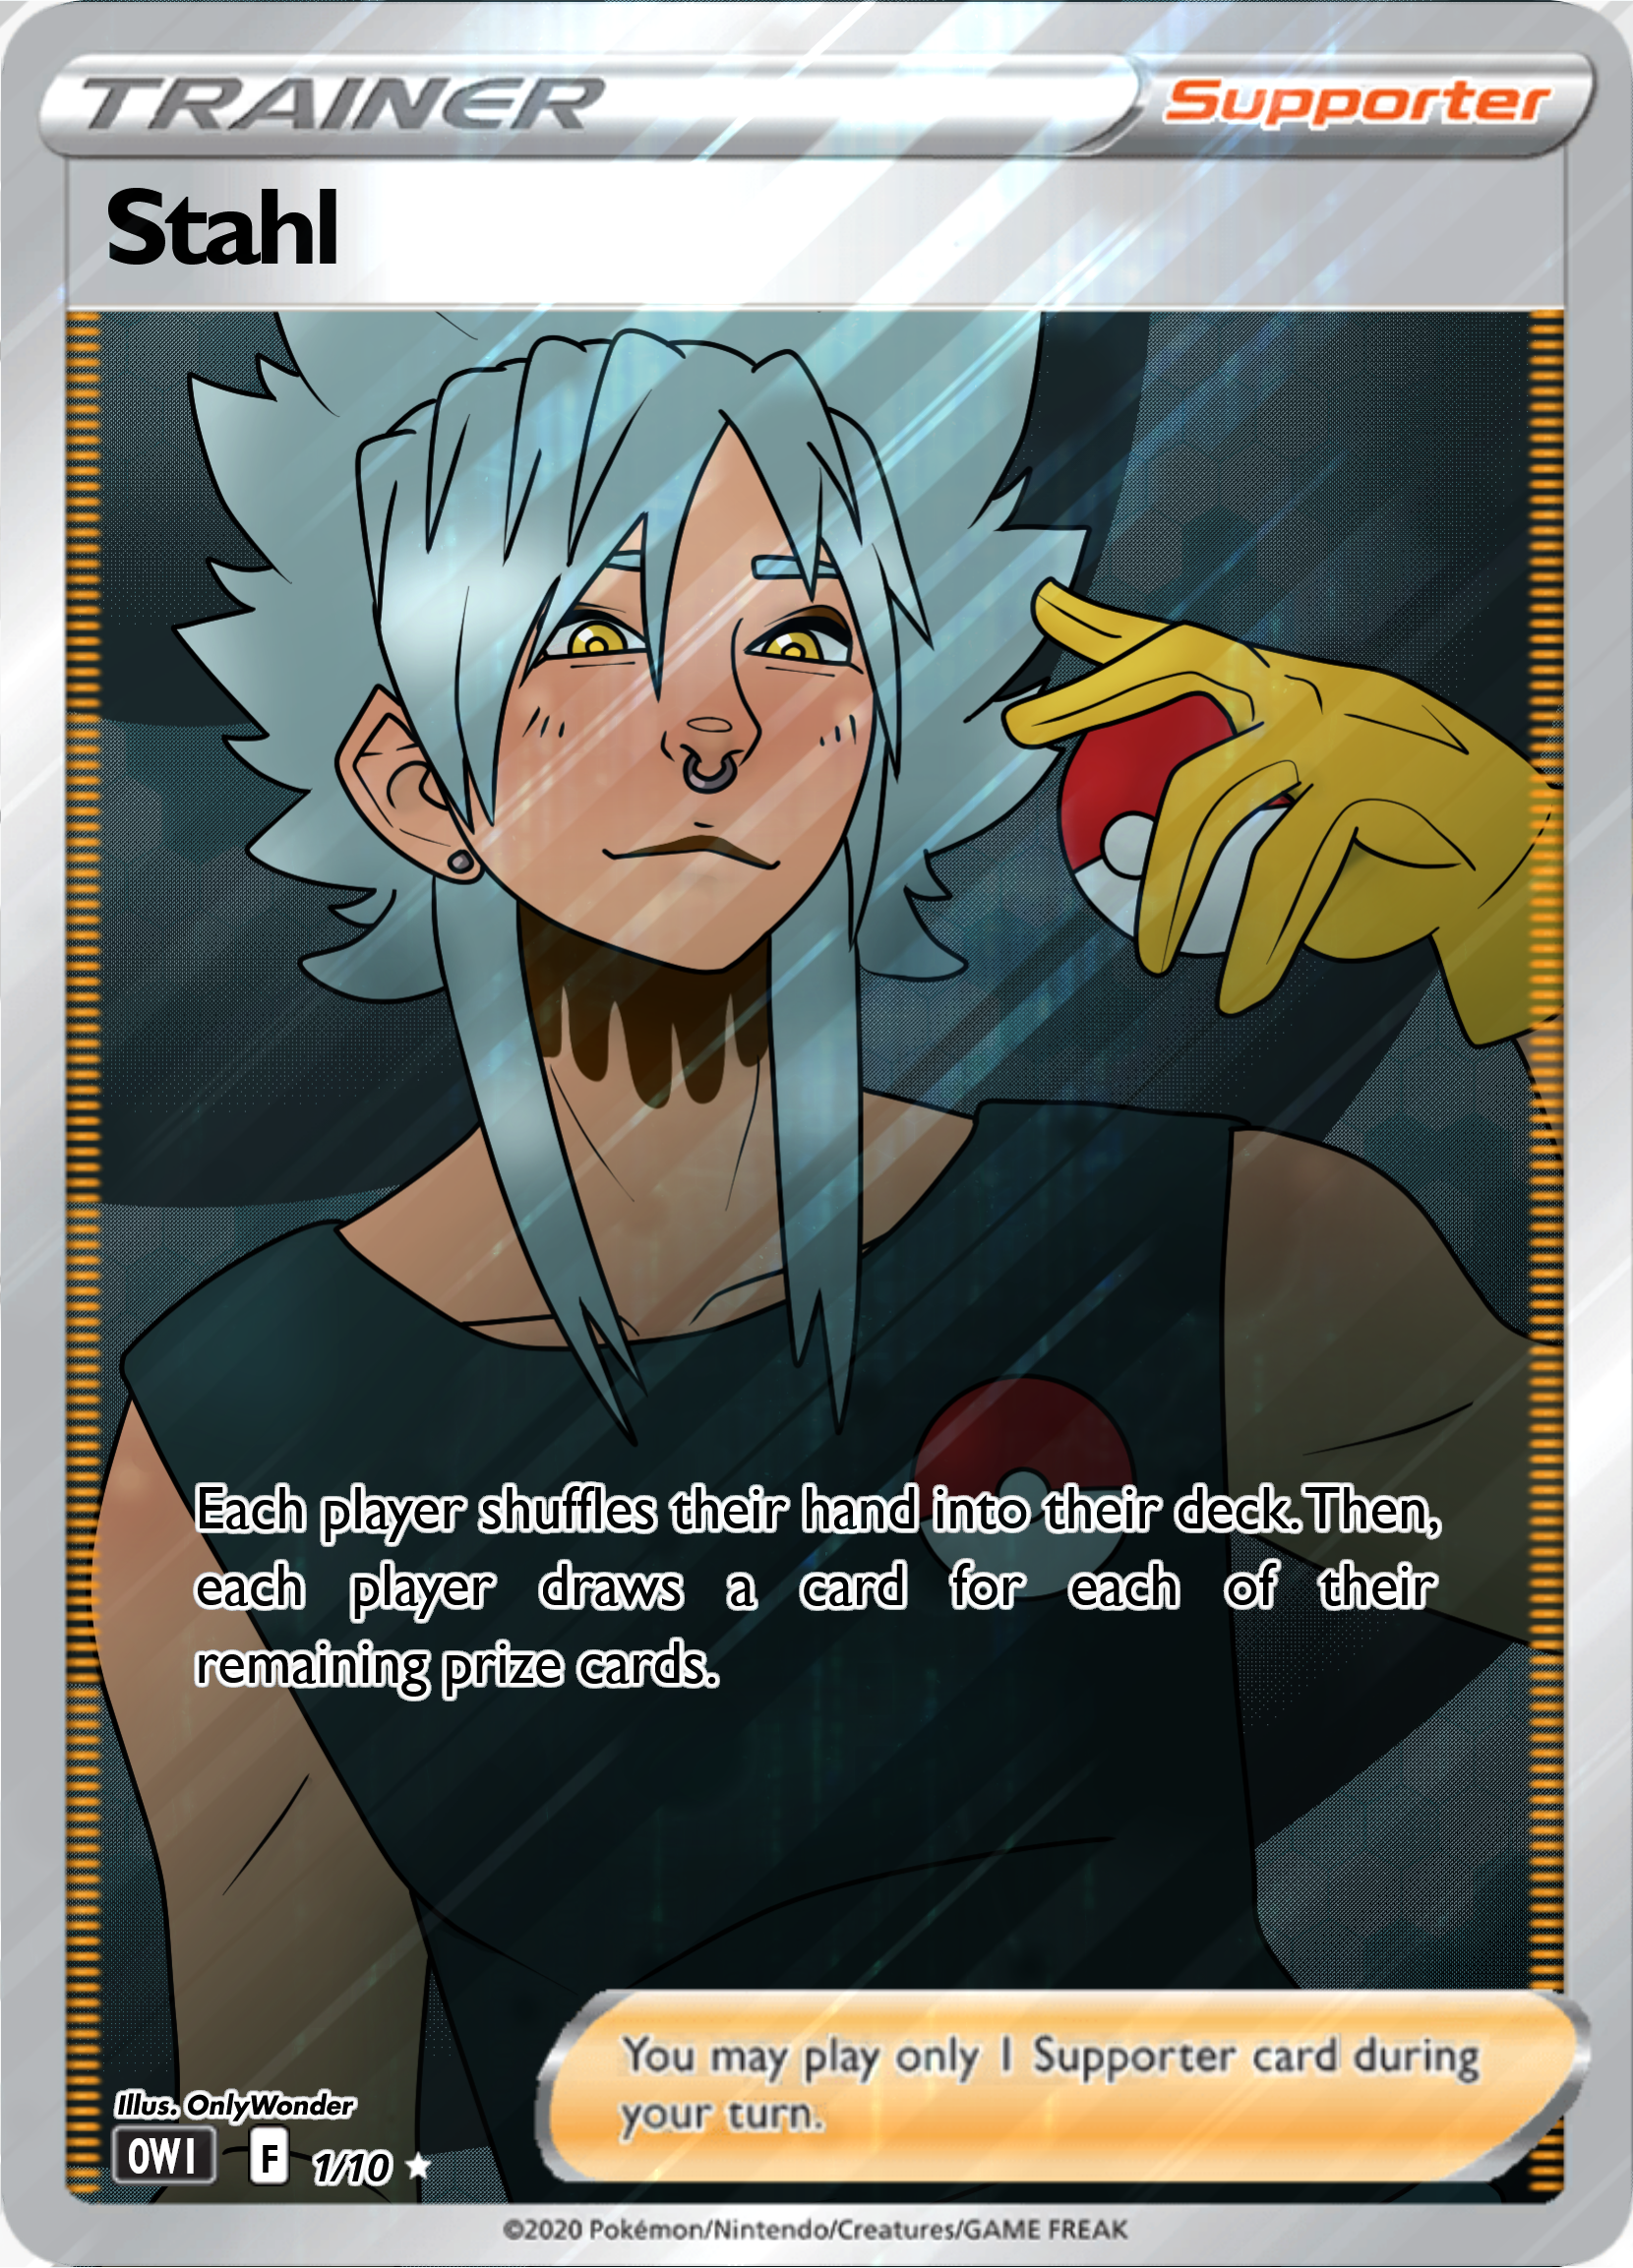 a pokemon fan card with an image of Stahl.